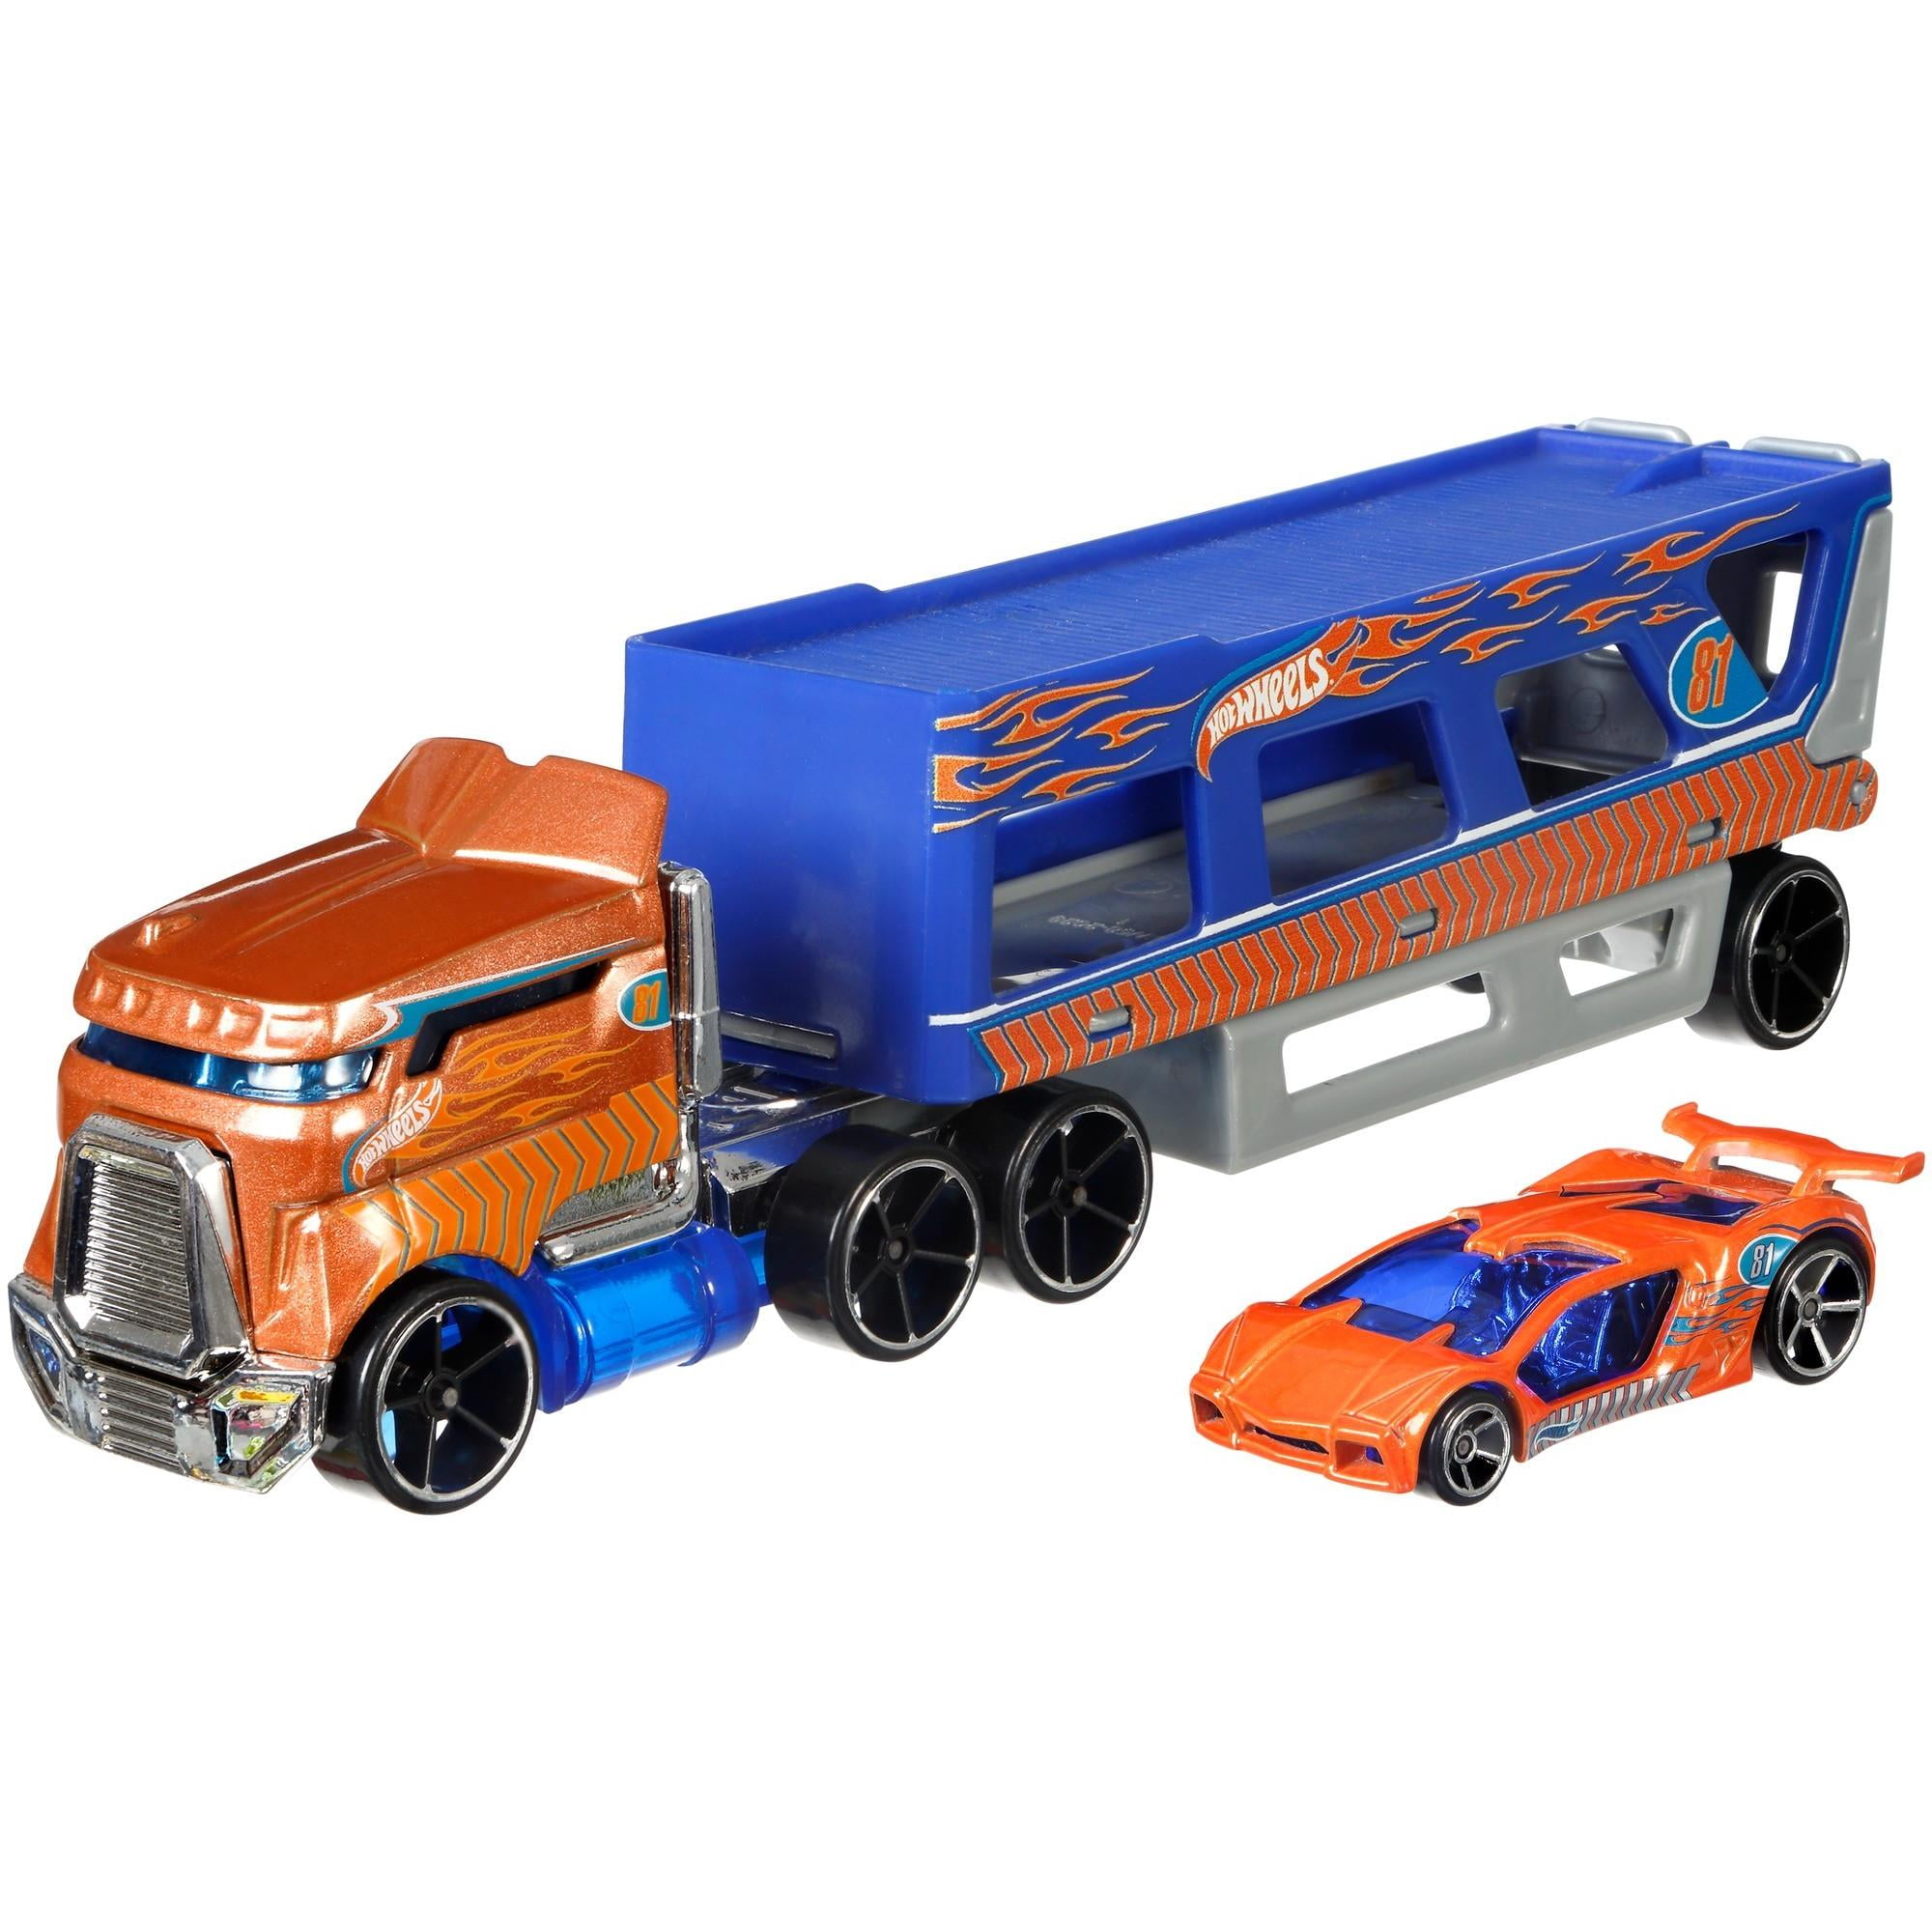 Hot Wheels Super Rigs Transporter & Car set brand new sealed choice of 5 